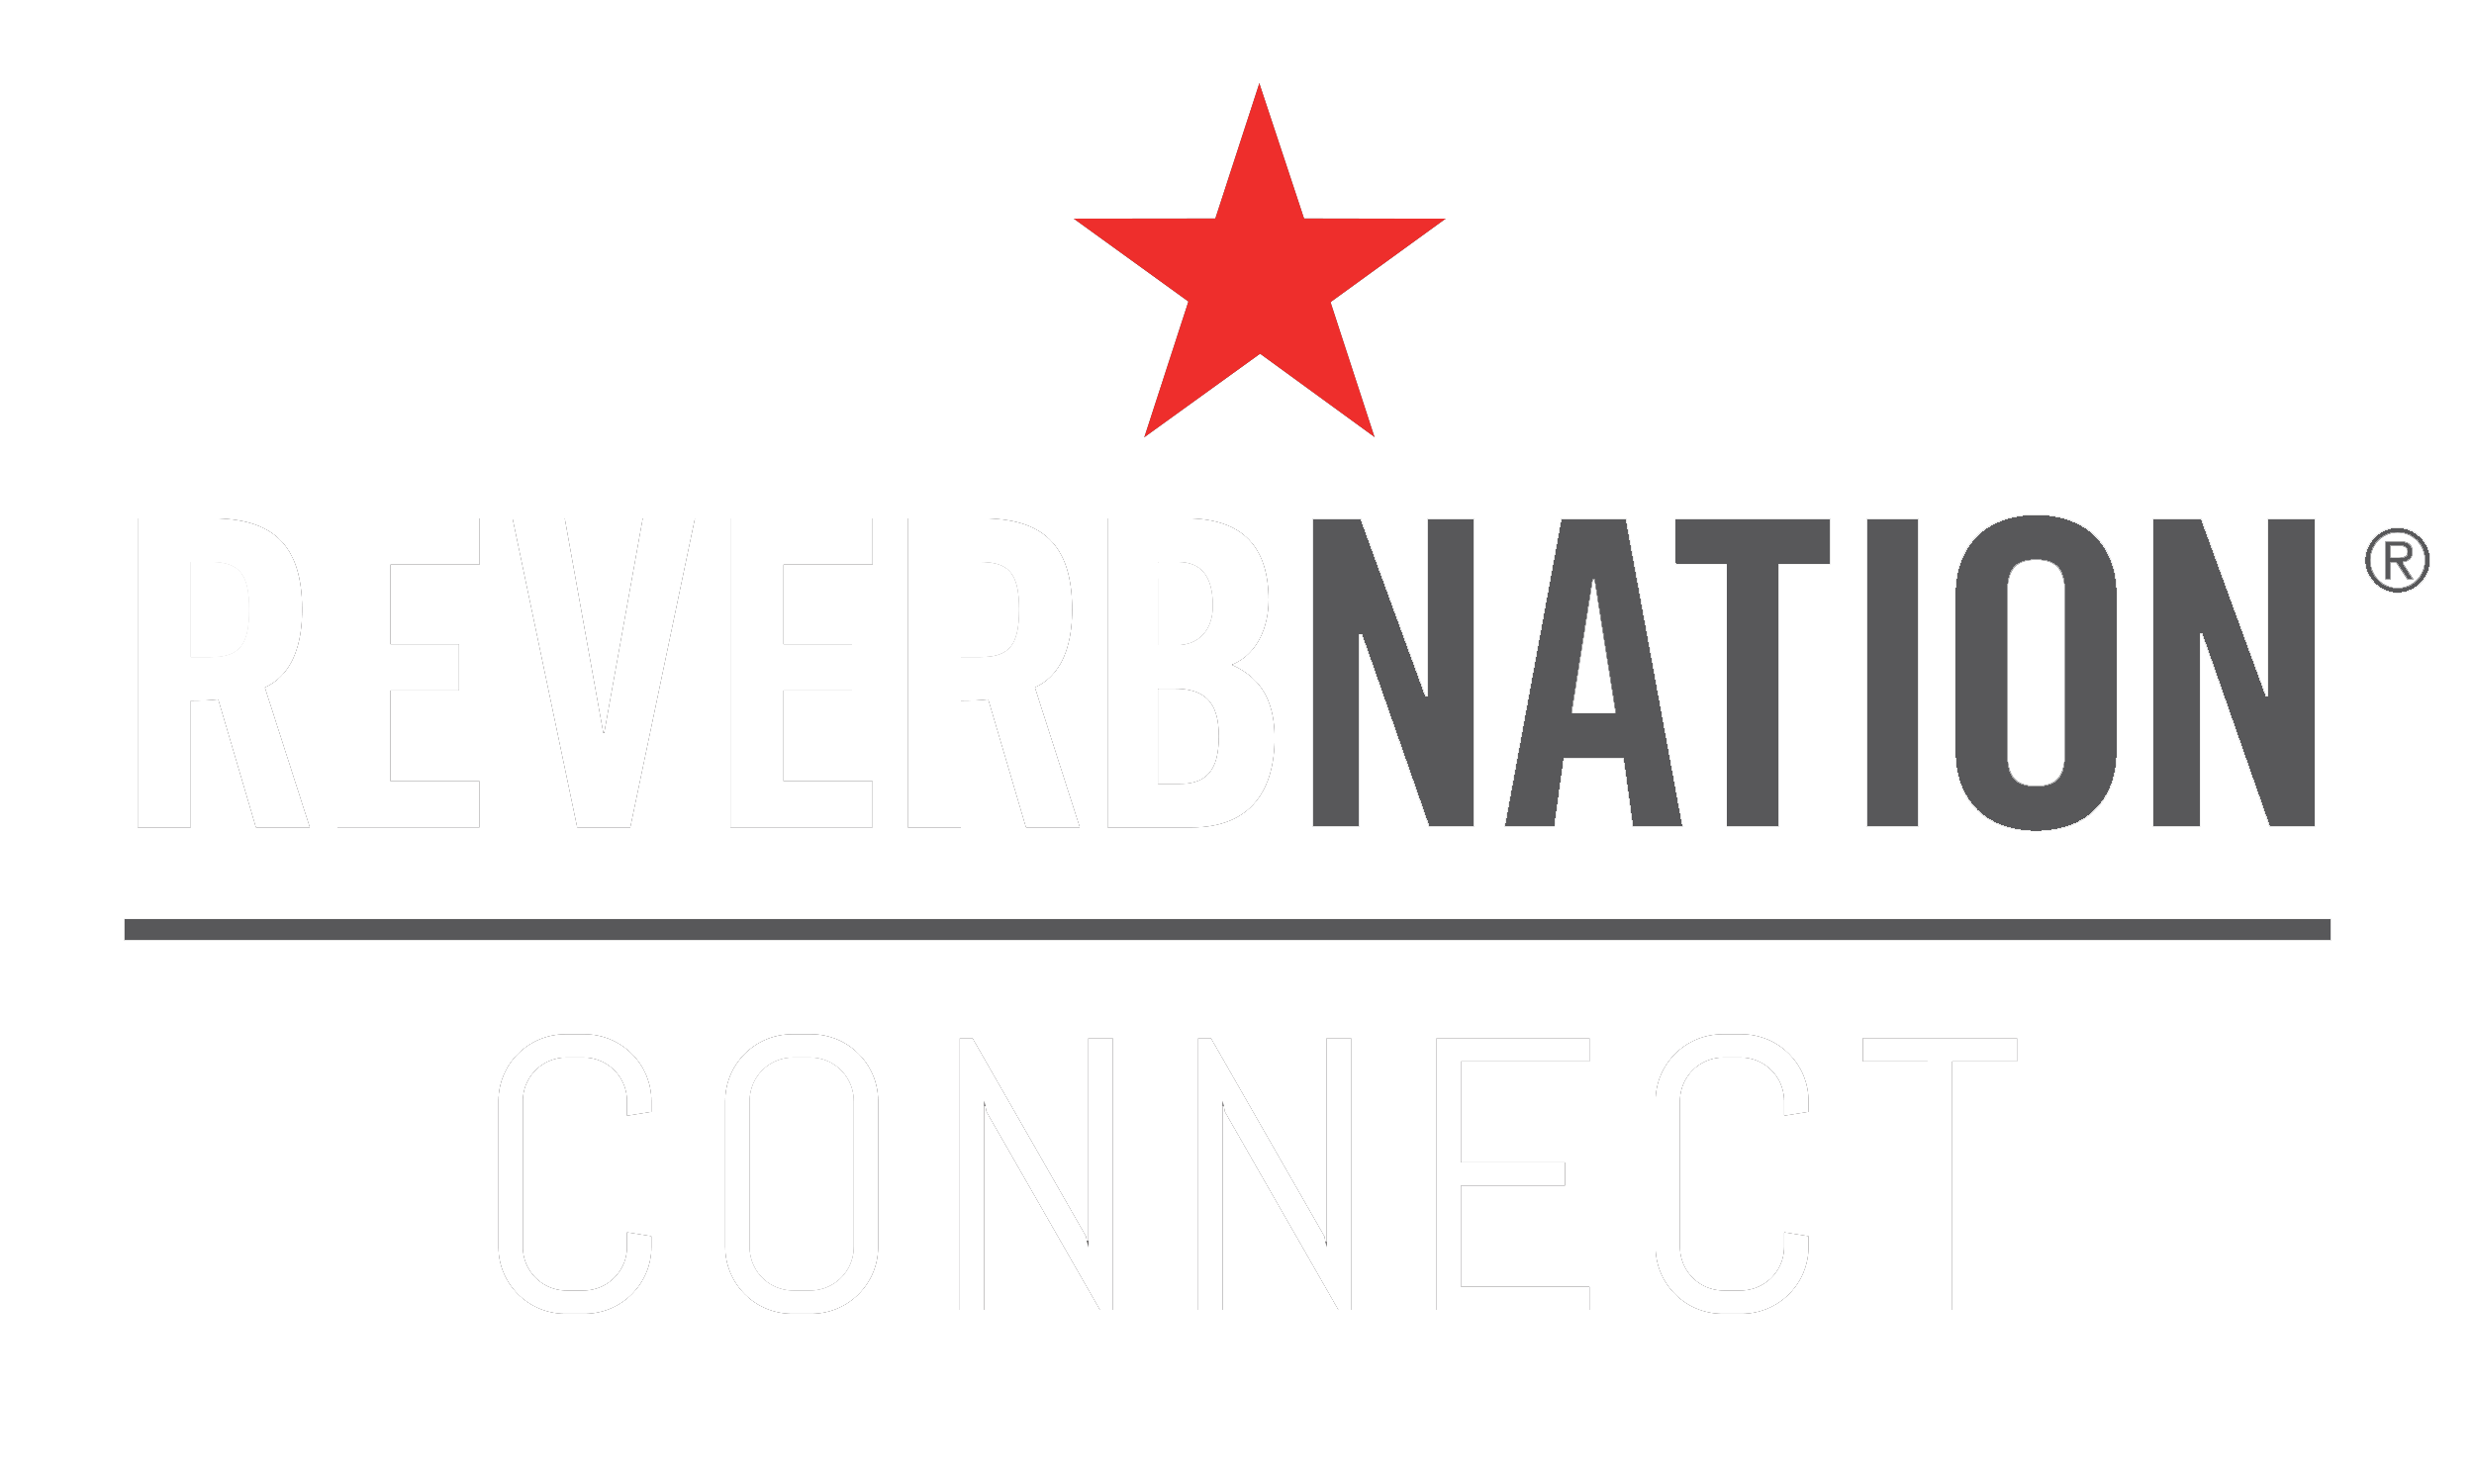 CONNECT in partnership with ReverbNation